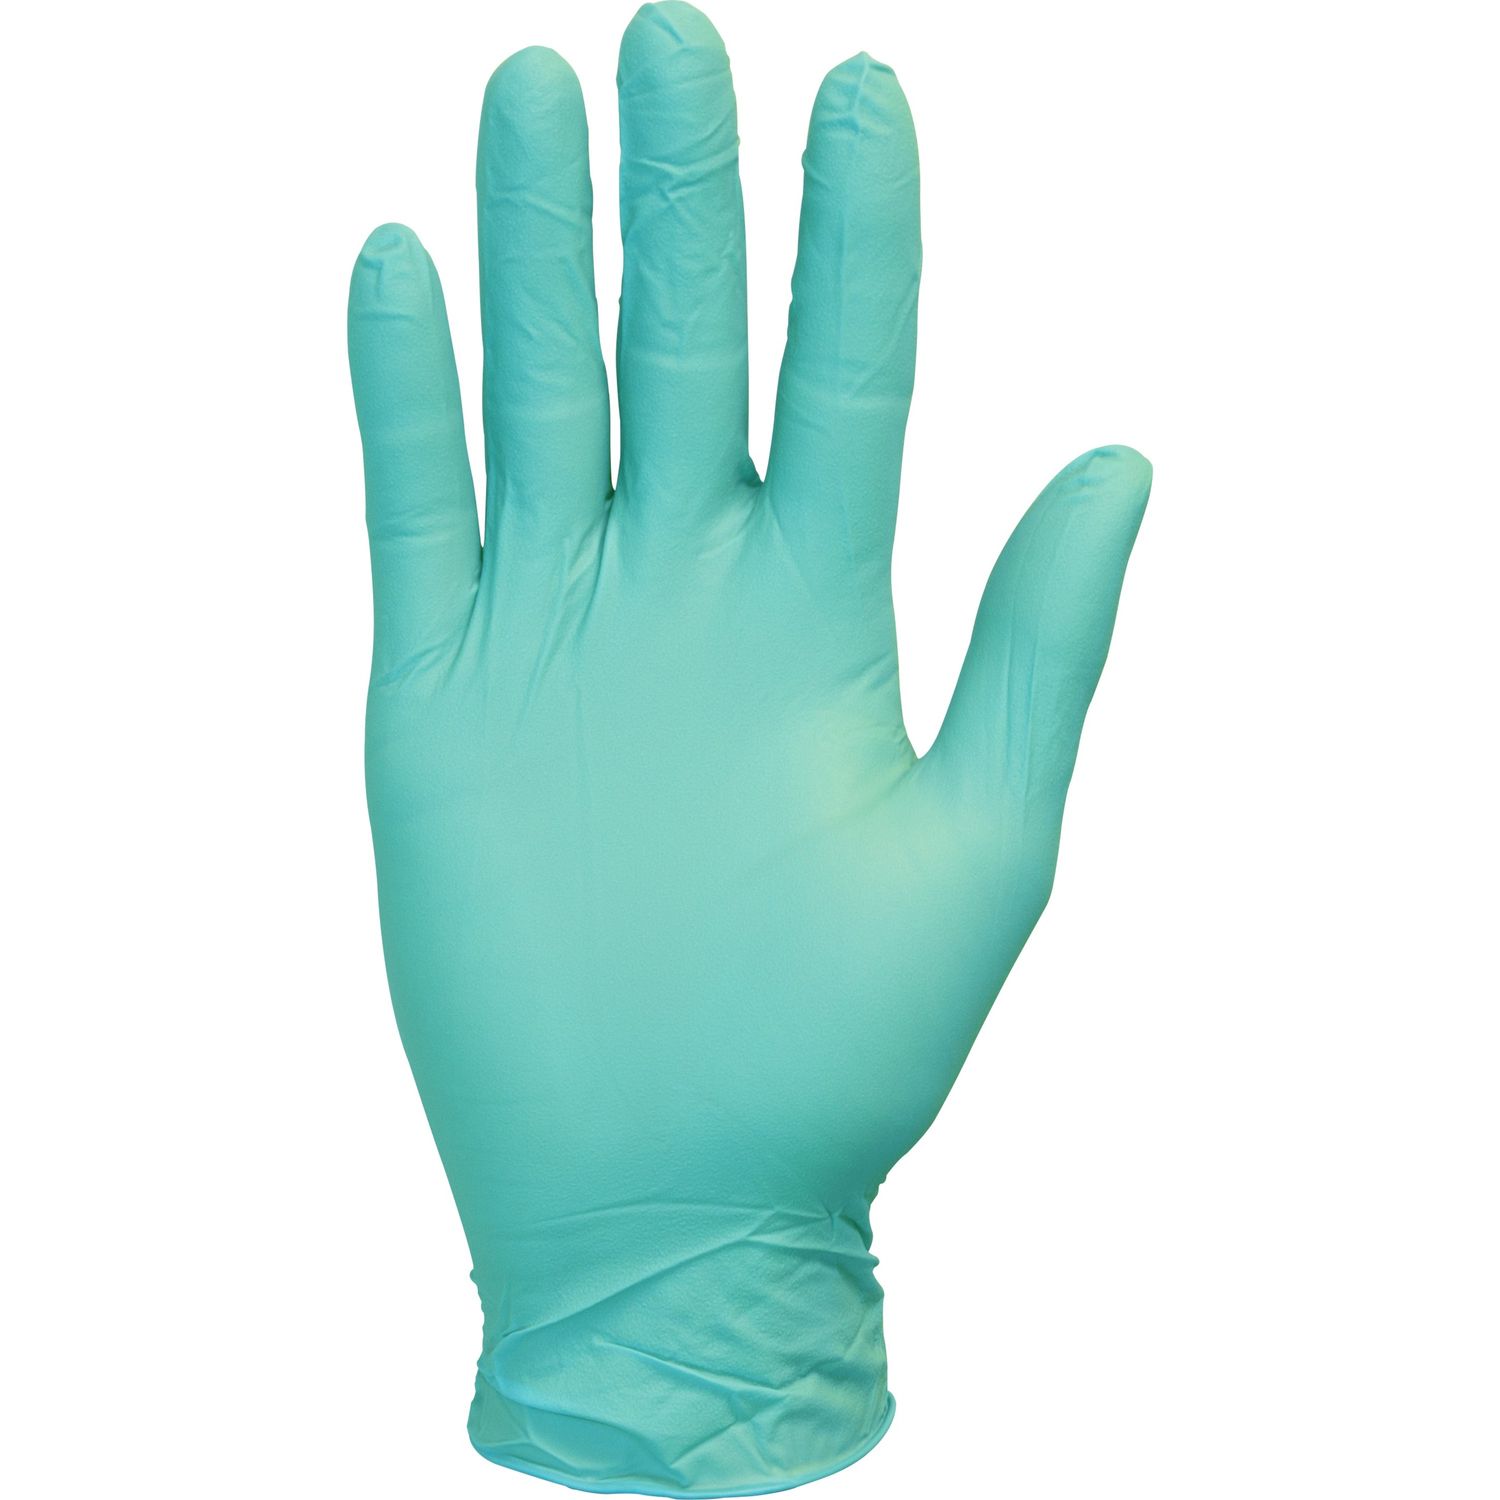 Powder Free Green Nitrile Gloves Small Size, Nitrile, Green, Latex-free, Silicone-free, Allergen-free, Powder-free, For Dishwashing, Cleaning, 9.65" Glove Length